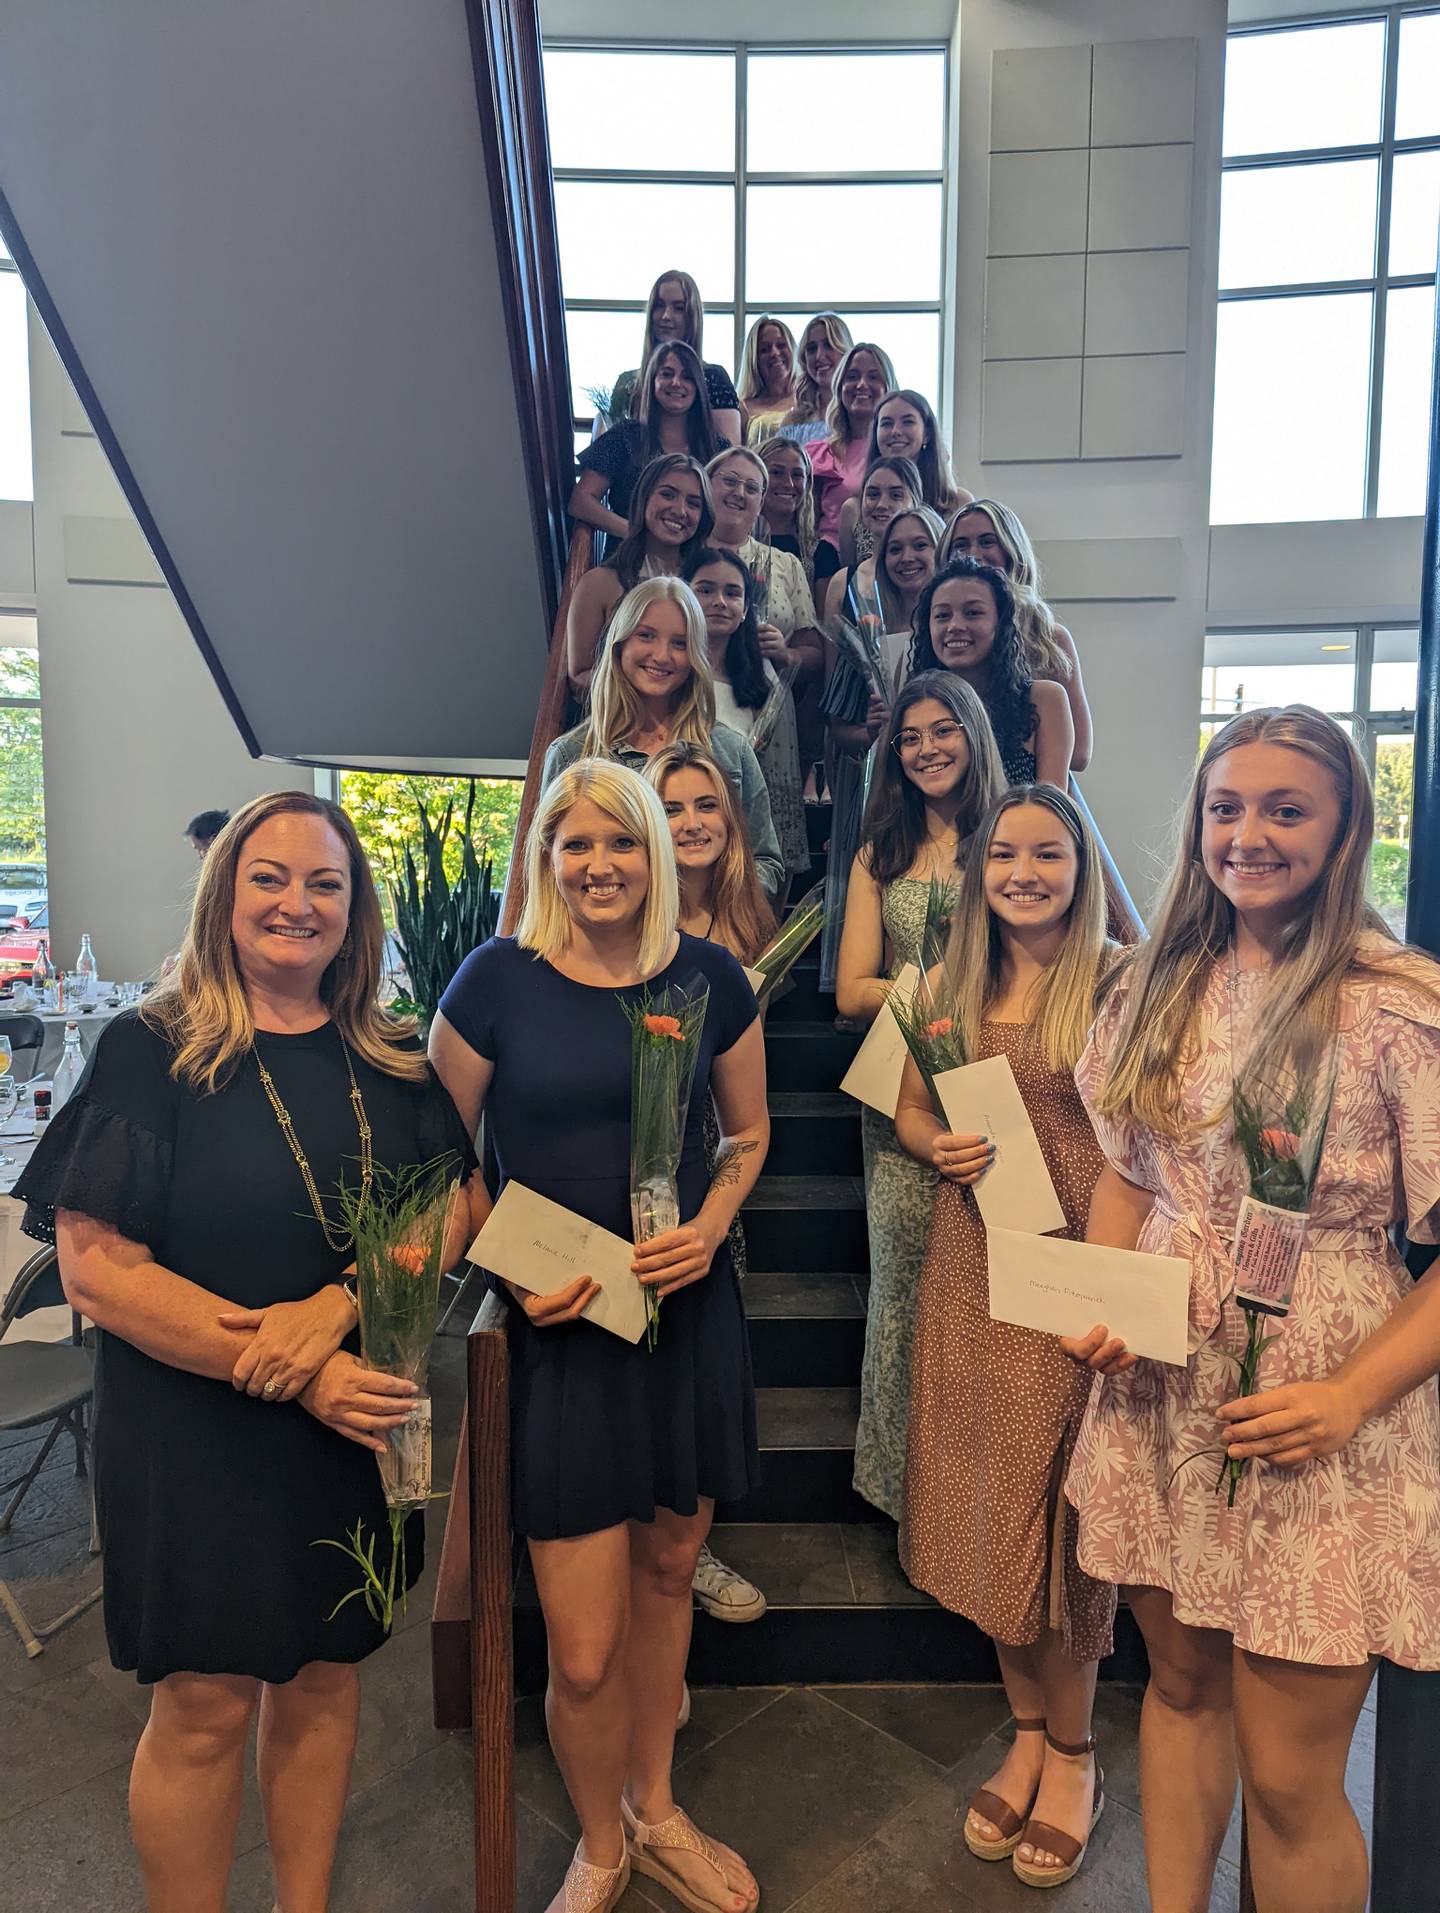 The Lincoln-way Area Business Women's Organization hosted a celebration dinner on Tuesday, June 21, 2022, at Gatto's in New Lenox to honor the recipients of the 2022 scholarships. Each young woman was awarded a $1,000 scholarship.